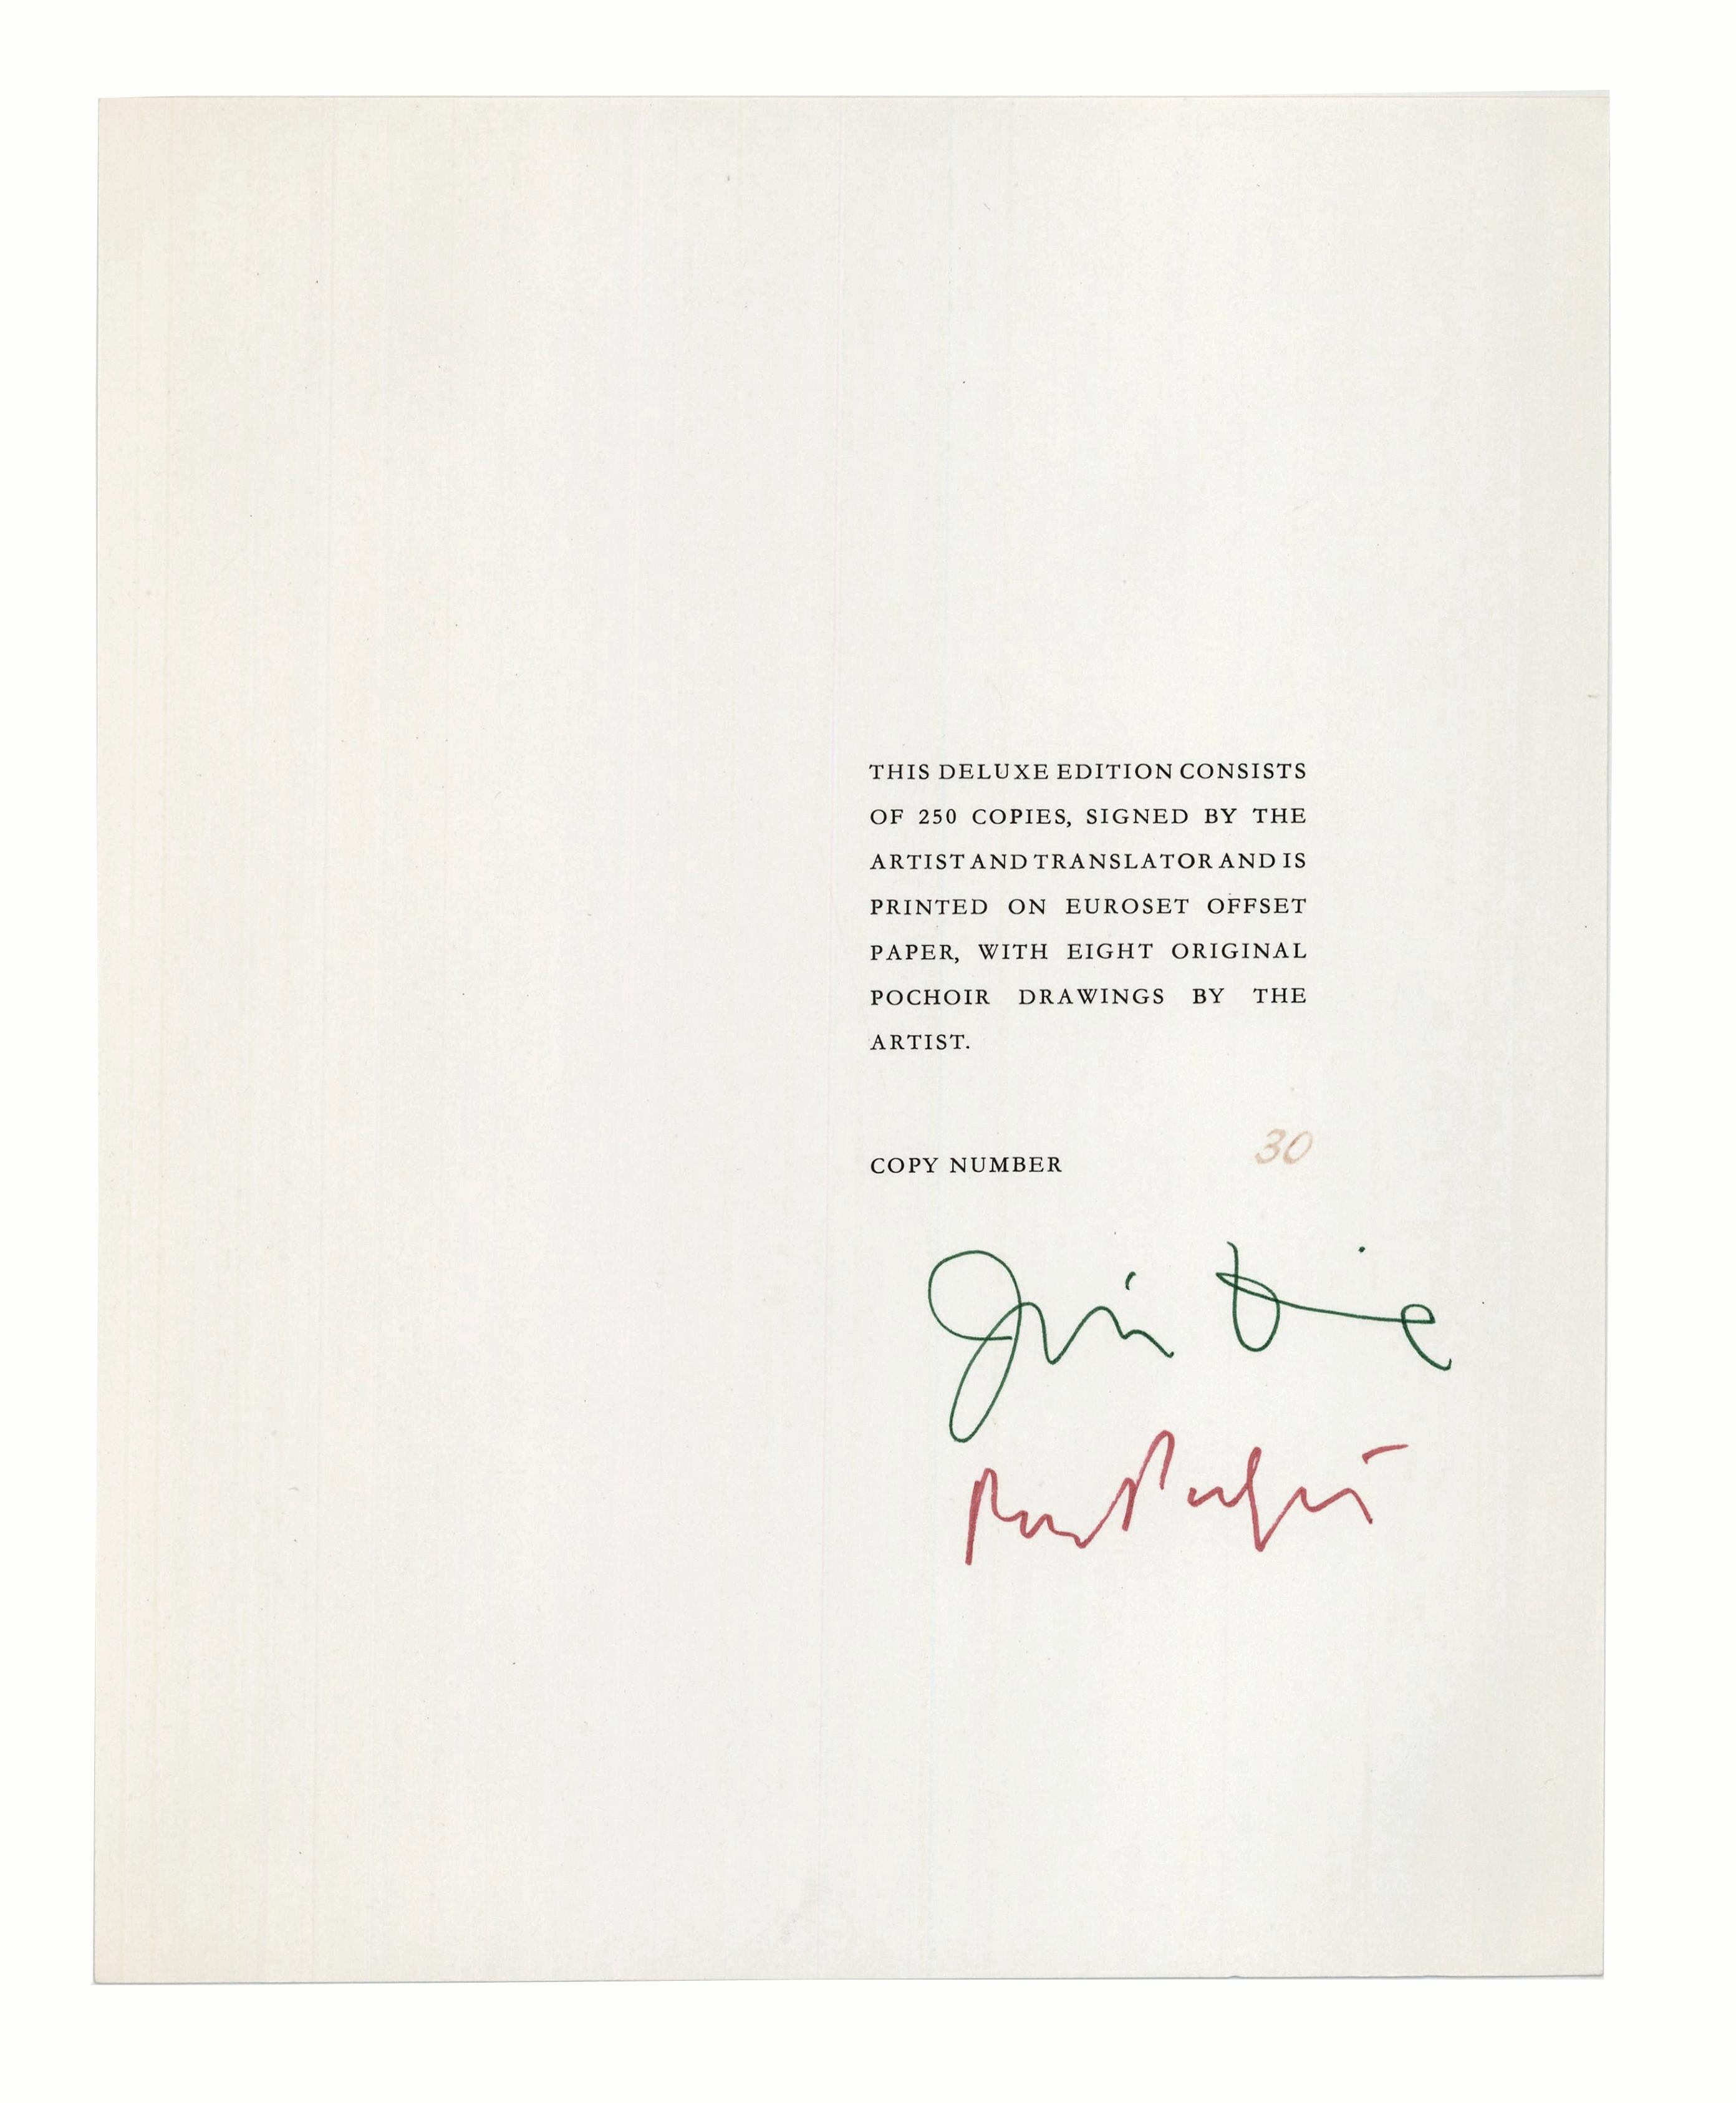 DINE, Jim. The Poet Assassinated.   By Guillaume Apollinaire.  128 pp.  Illustrated with eight original pochoir plates, each signed and numbered by Dine.  4to., 260 x 210 mm, loose as issued with plates and text laid into an illustrated wrapper with